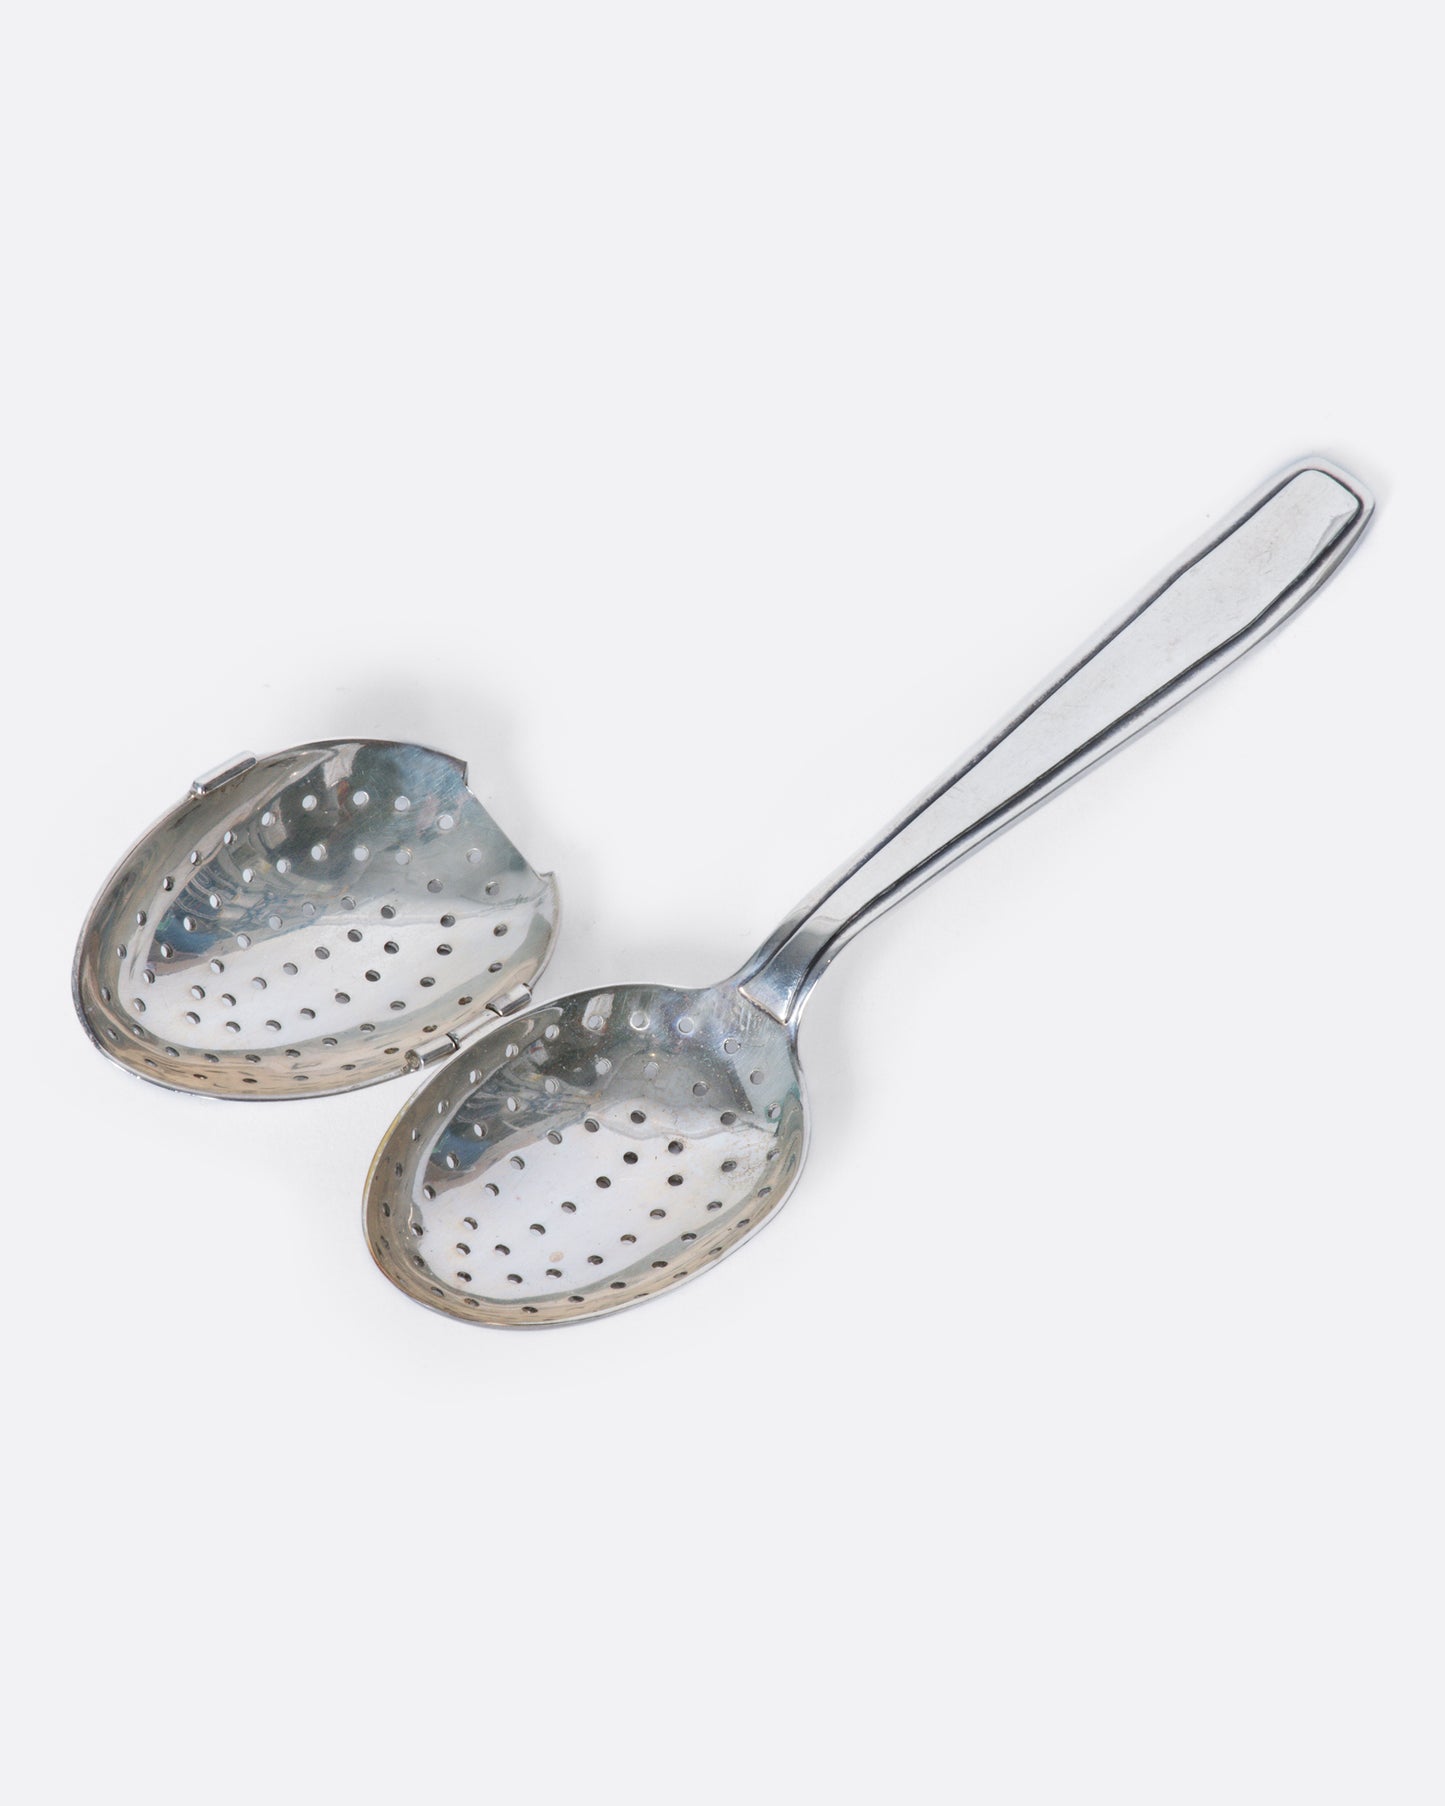 A perforated sterling silver spoon with a hinged perforated lid to create a tea diffuser.